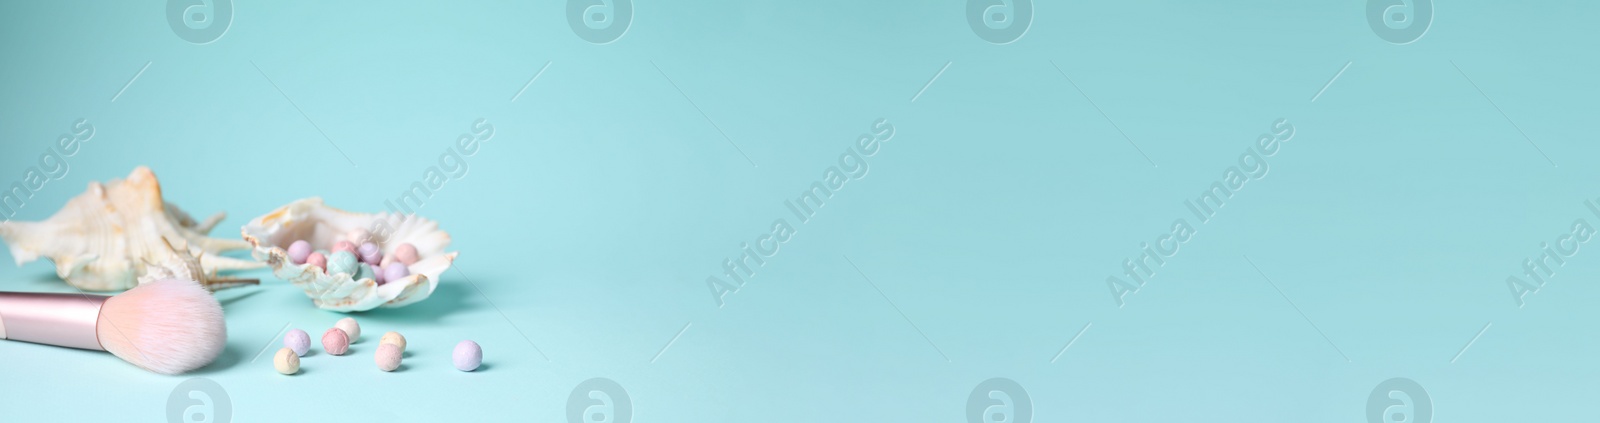 Photo of Powder balls, make up brush and sea shell on light blue background, space for text. Banner design